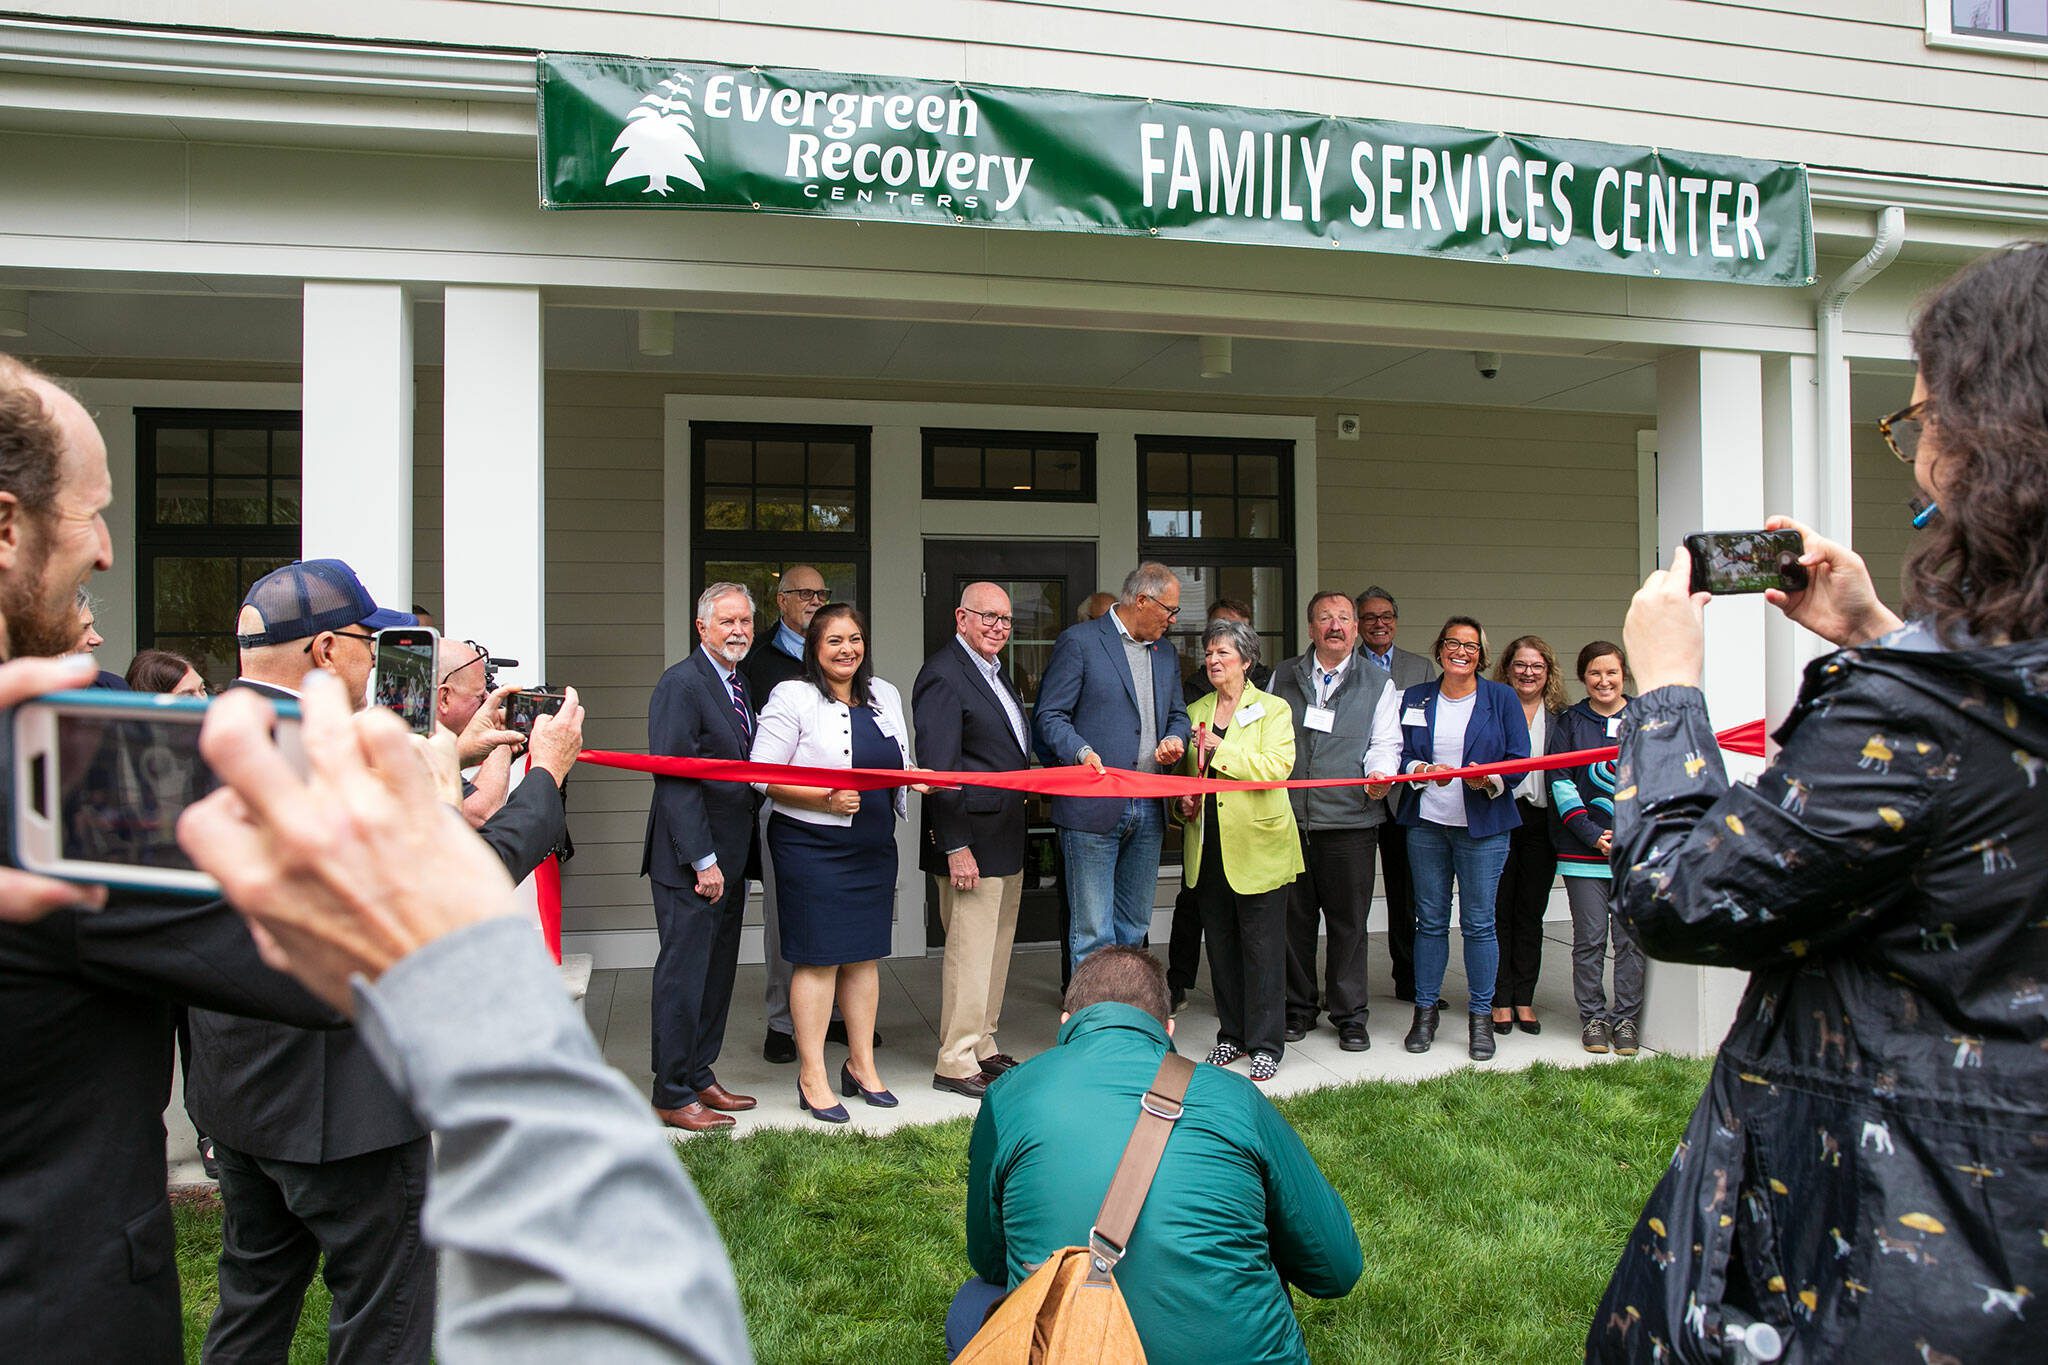 Gov. Jay Inslee and Evergreen Recovery Centers CEO Linda Grant, surrounded by others, cut the ceremonial ribbon during an event celebrating the Evergreen Manor Family Services Center on Tuesday, Oct. 10, 2023, in Everett, Washington. (Ryan Berry / The Herald)